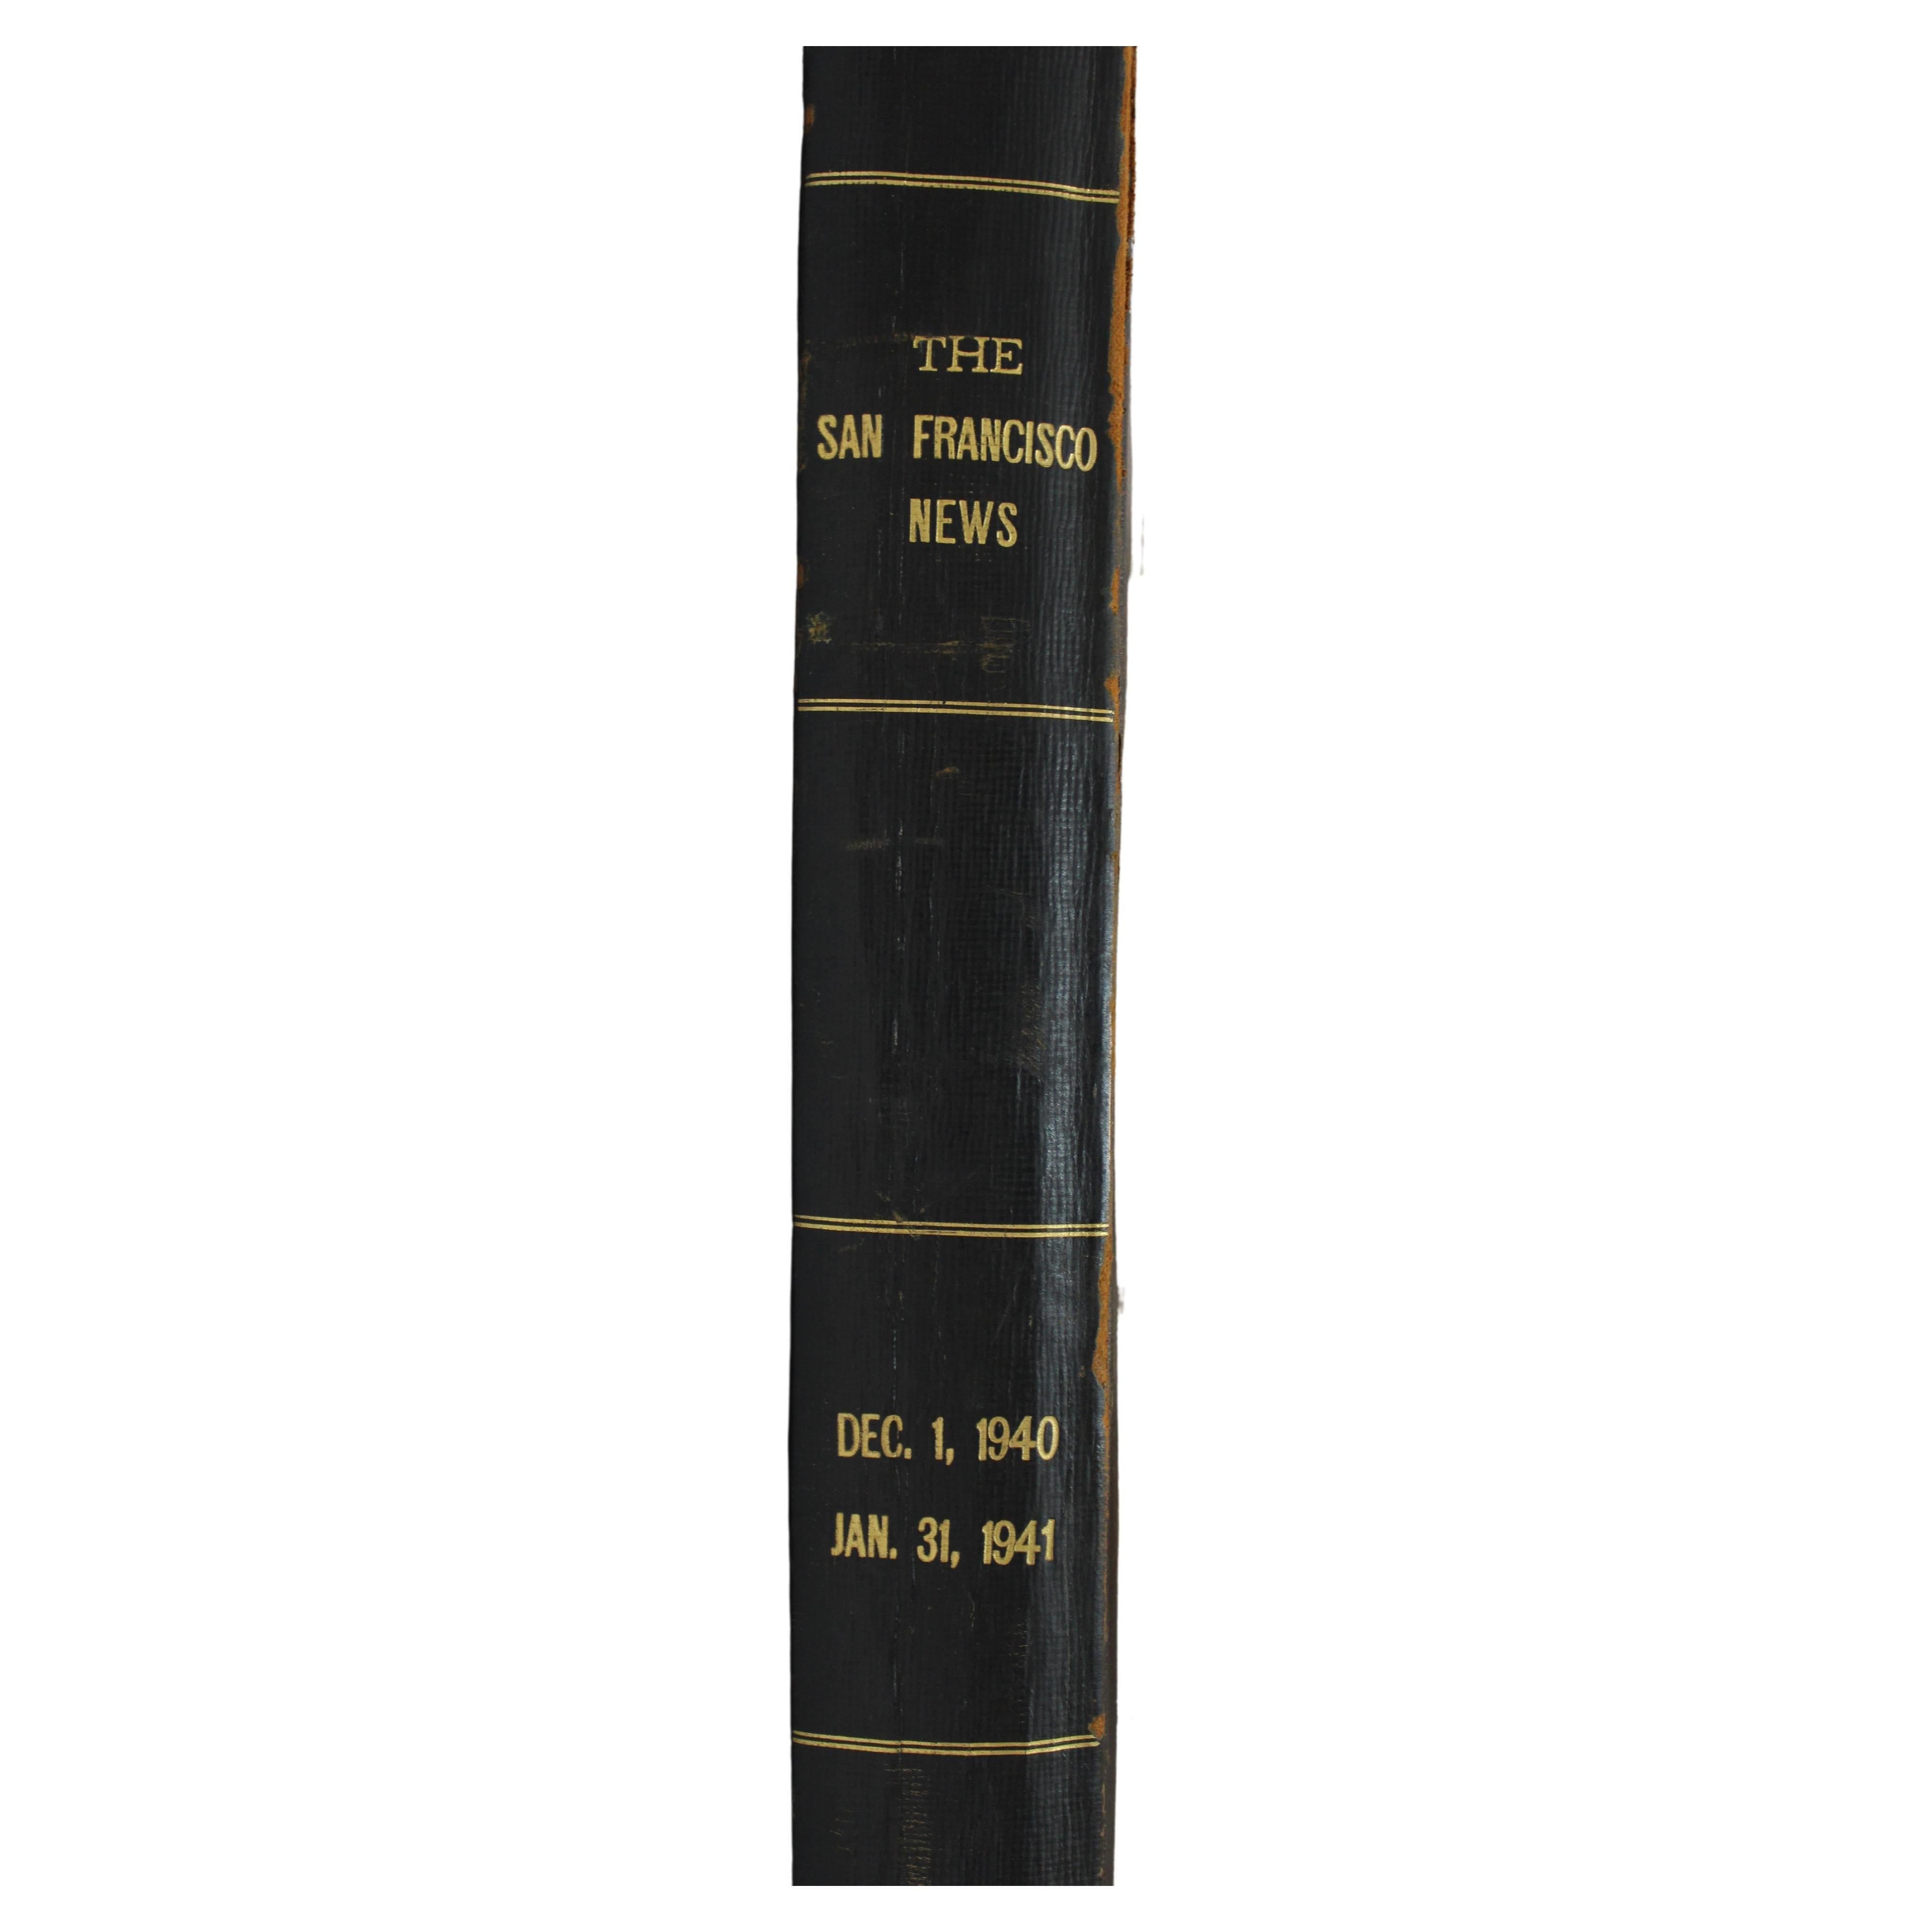 Leather Bound Volume of the San Francisco News, 1940-41 For Sale